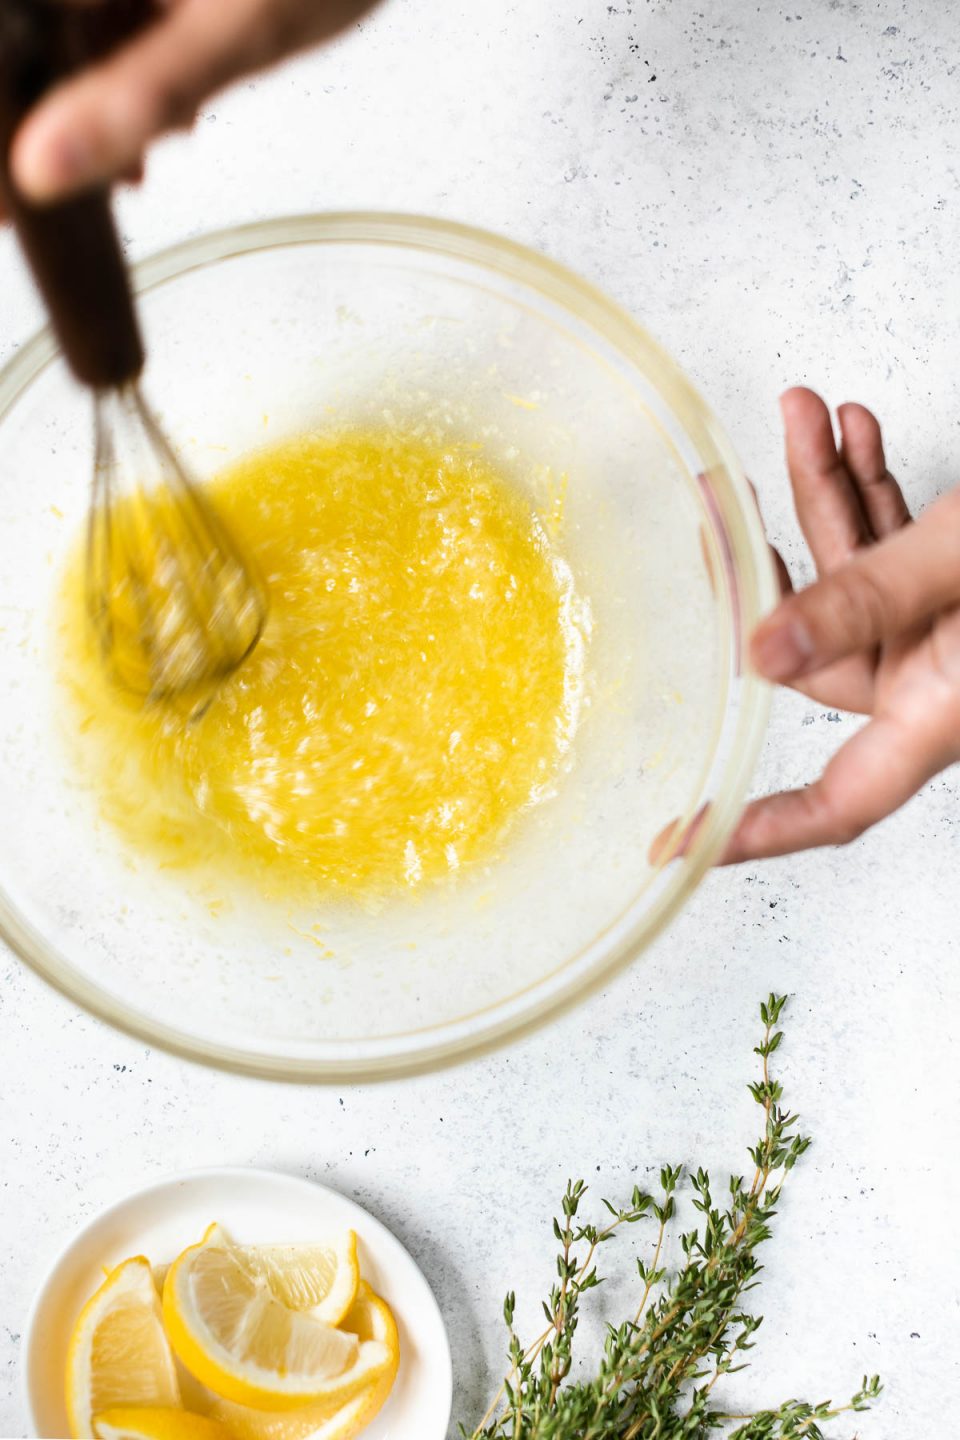 A woman's hands shown whisking the lemon garlic marinade together in a glass mixing bowl. The bowl sits atop a white surface, with some lemon wedges & sprigs of fresh thyme next to it. 